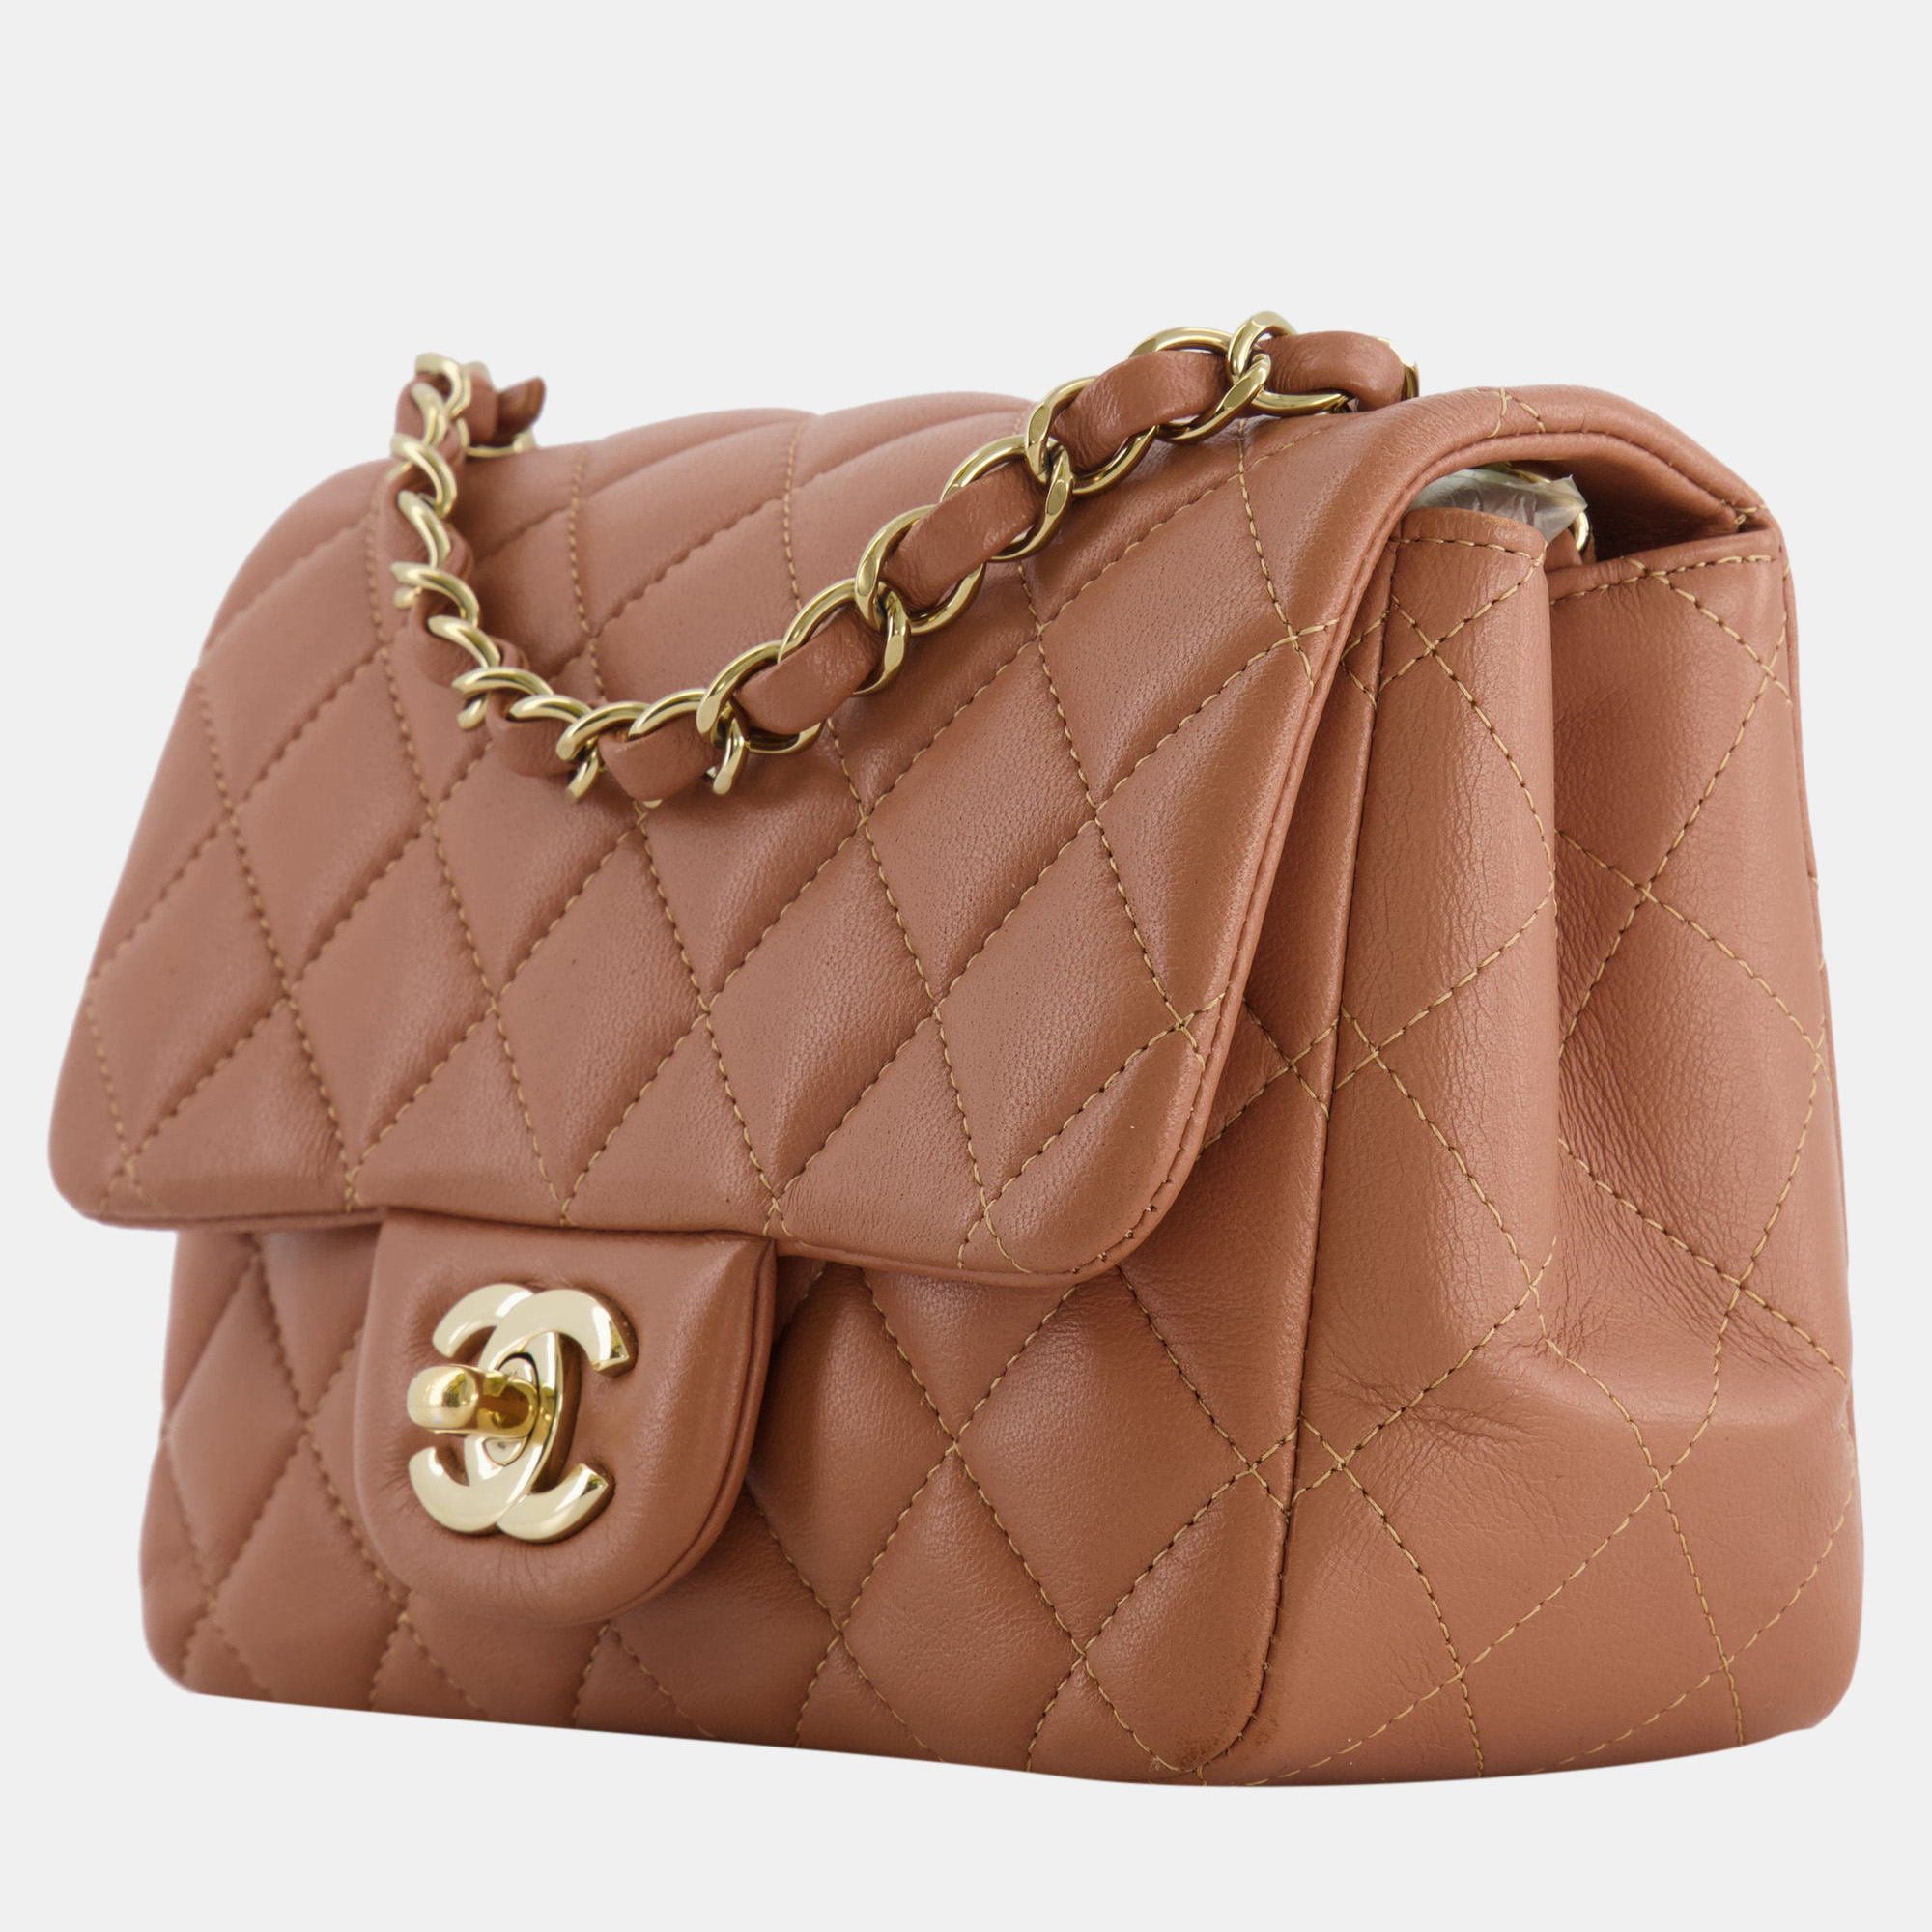 

Chanel Caramel Mini Square Bag in Lambskin Leather with Champagne Gold Hardware, Brown